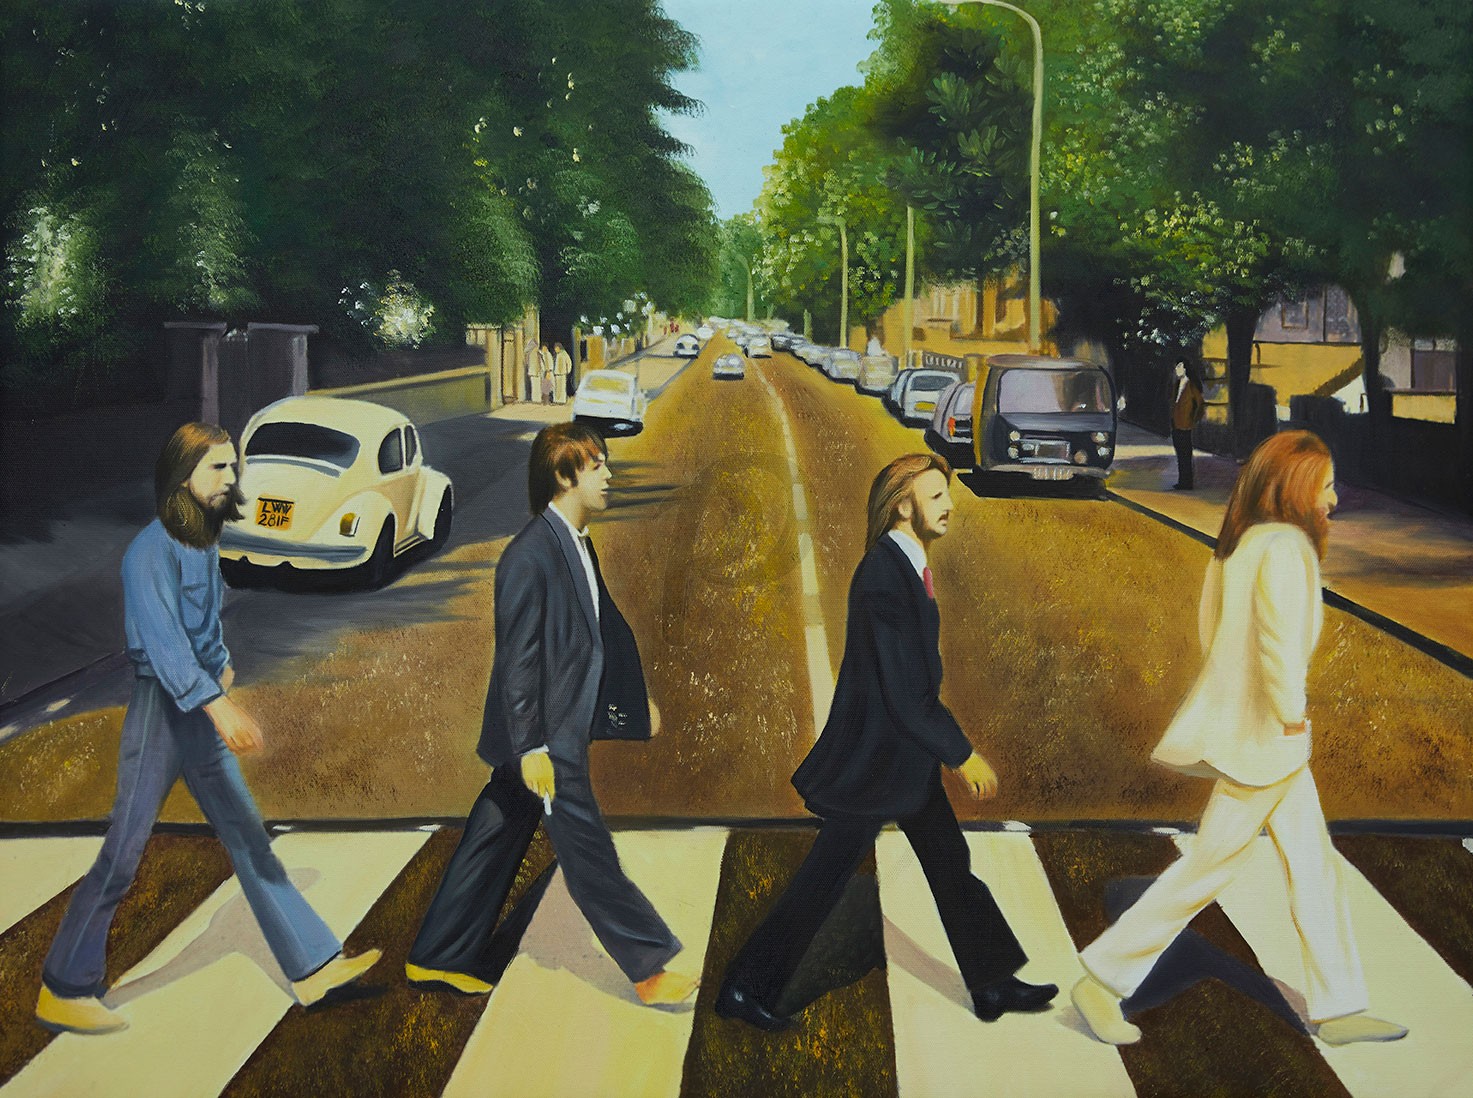 Beatles Crossing the Abbey Road (Hand-Painted Reproduction)